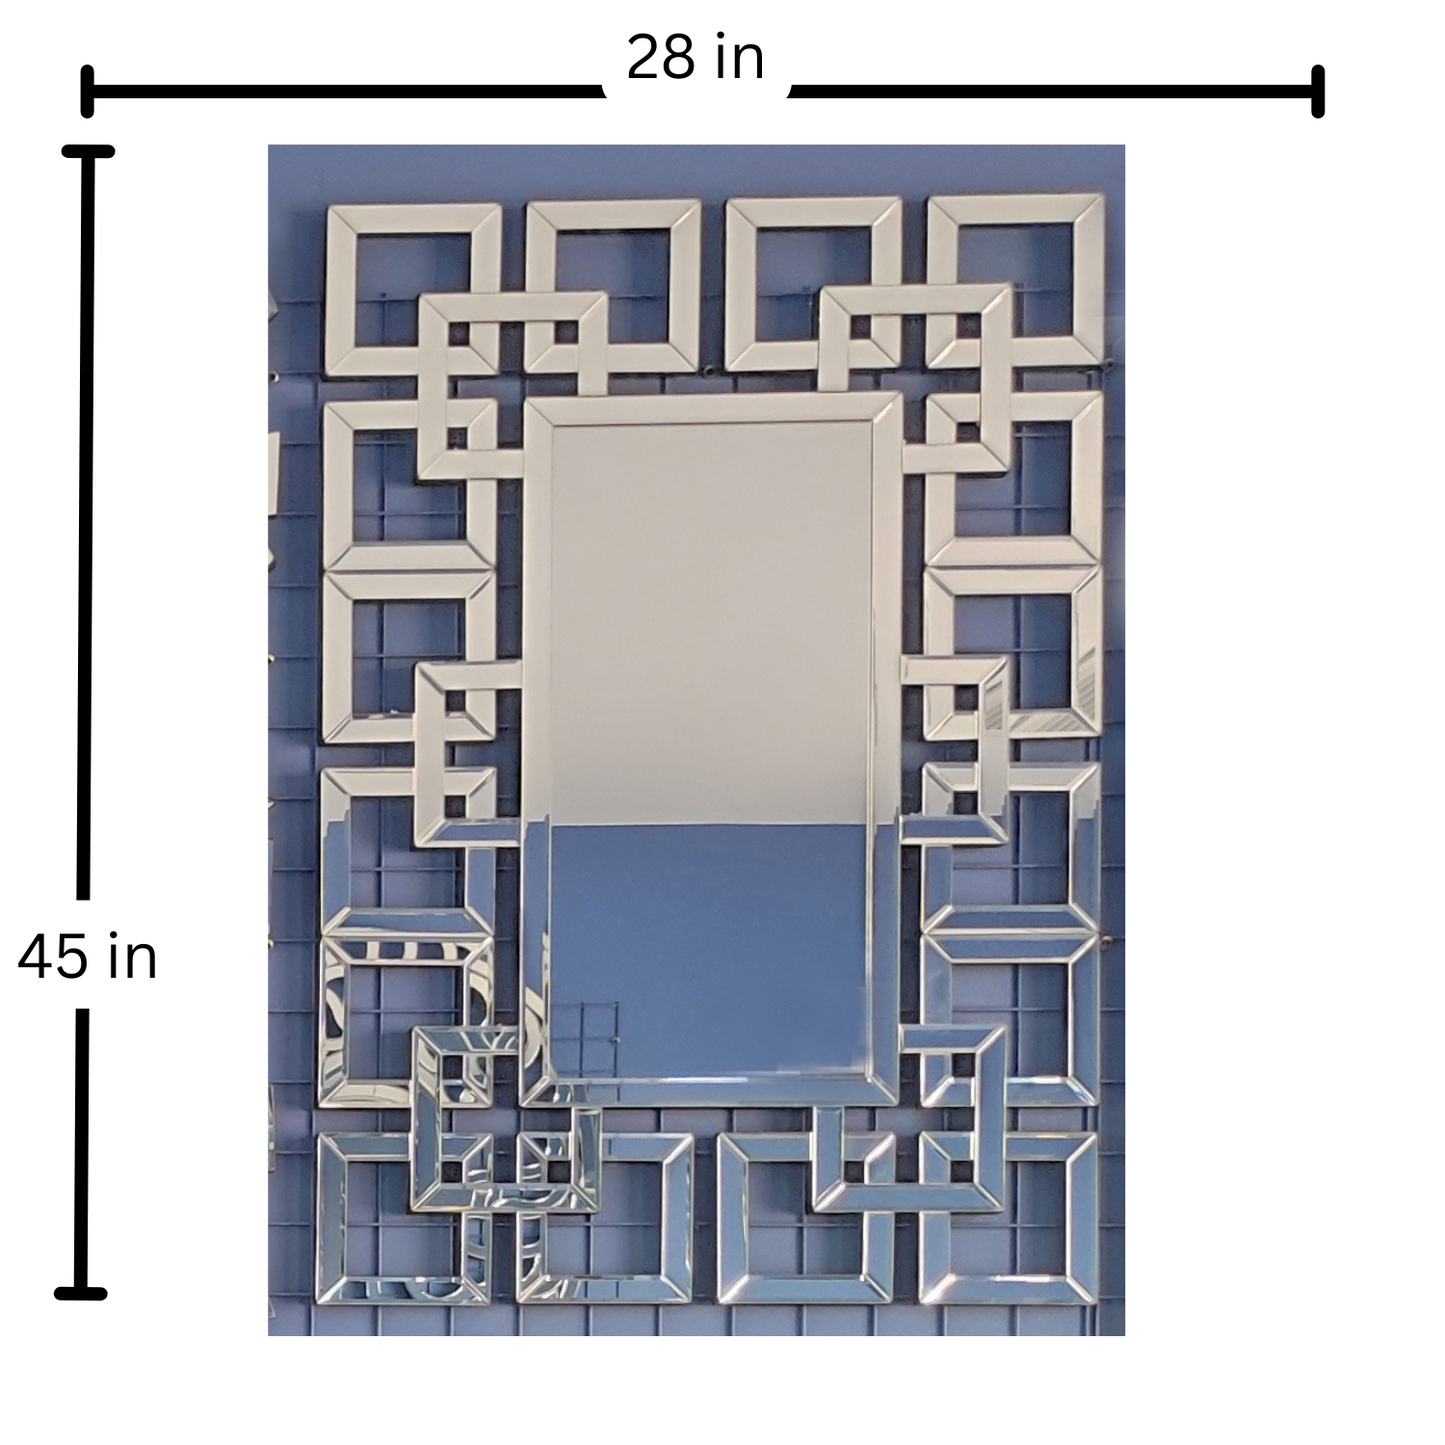 Worlds of Squares Reflection - Modern Wall Mirror with Geometric Intricacy for Contemporary Home Decor